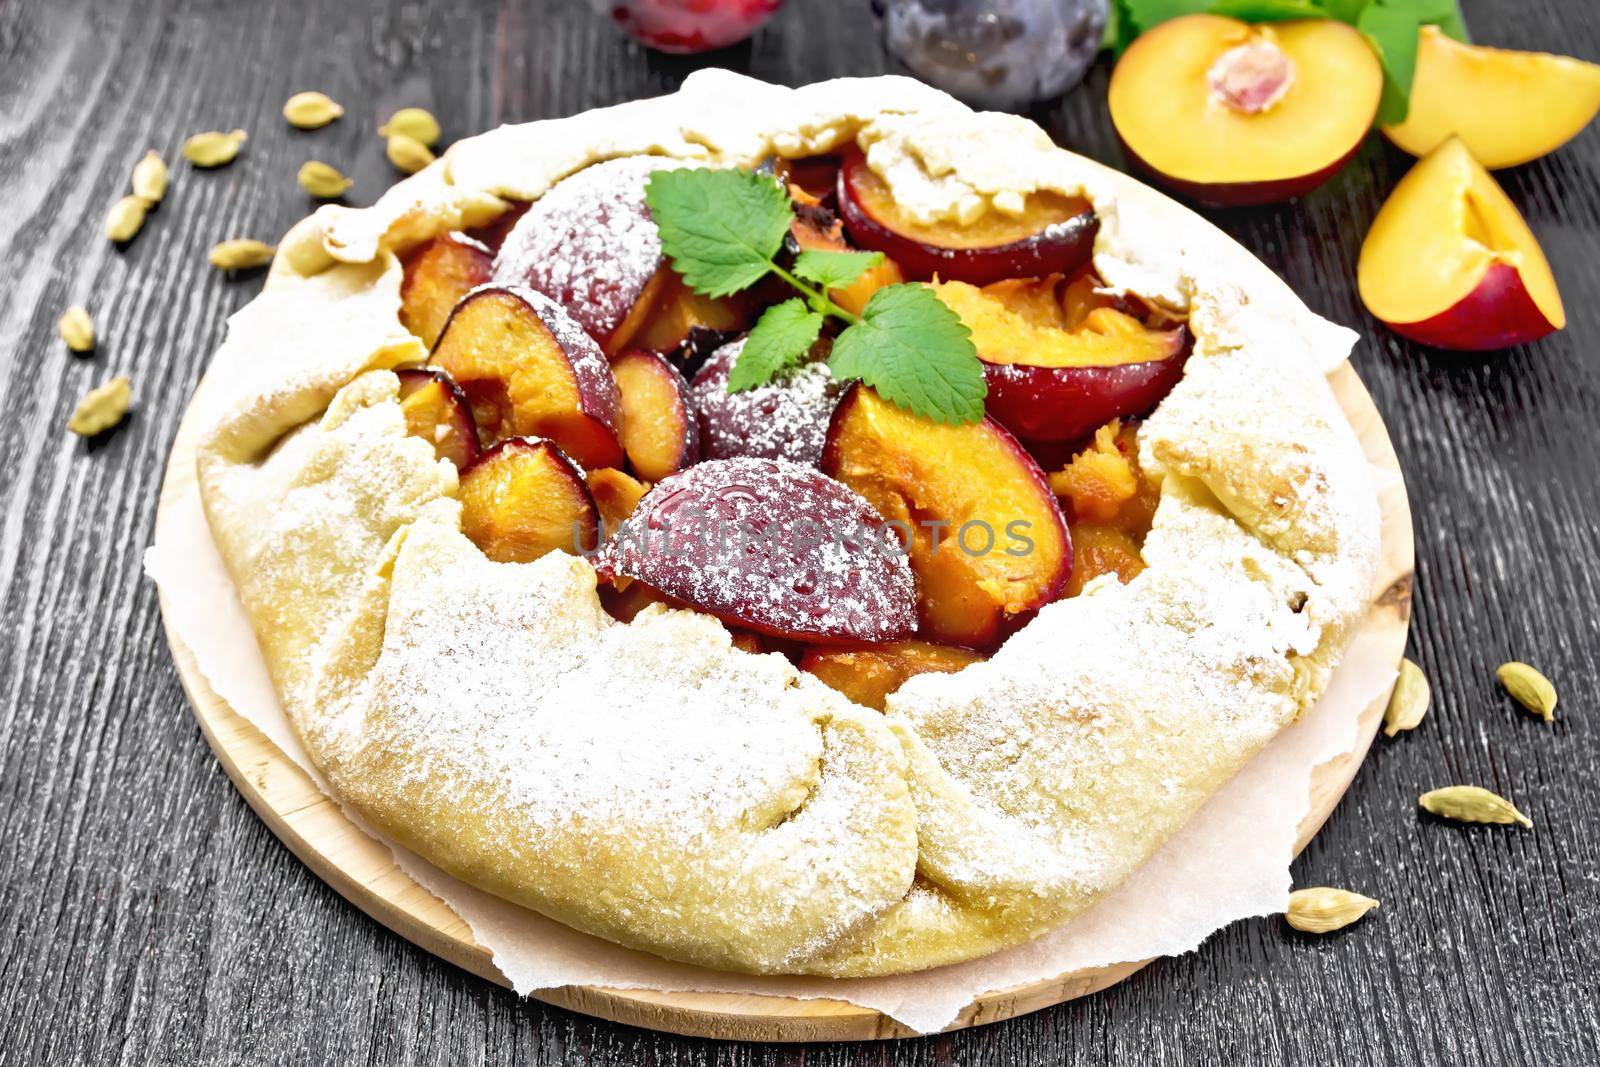 Sweet pie with plum, sugar and cardamom on parchment, sprigs of green mint on a dark wooden board background